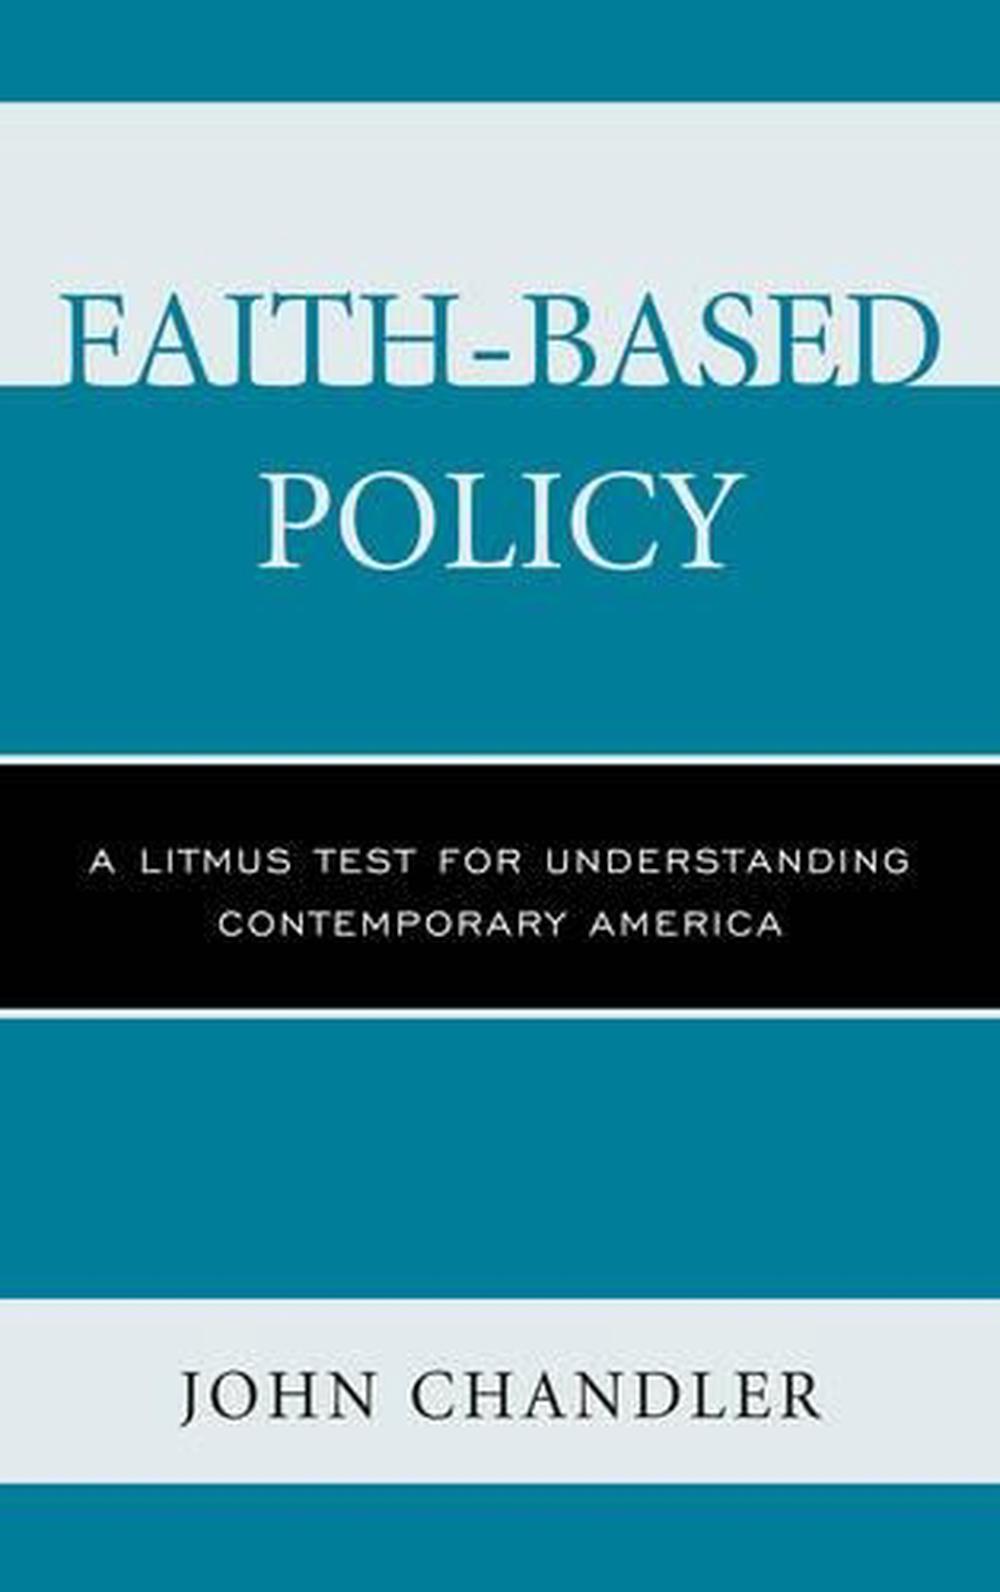 Faith-based Policy: A Litmus Test for Understanding Contemporary